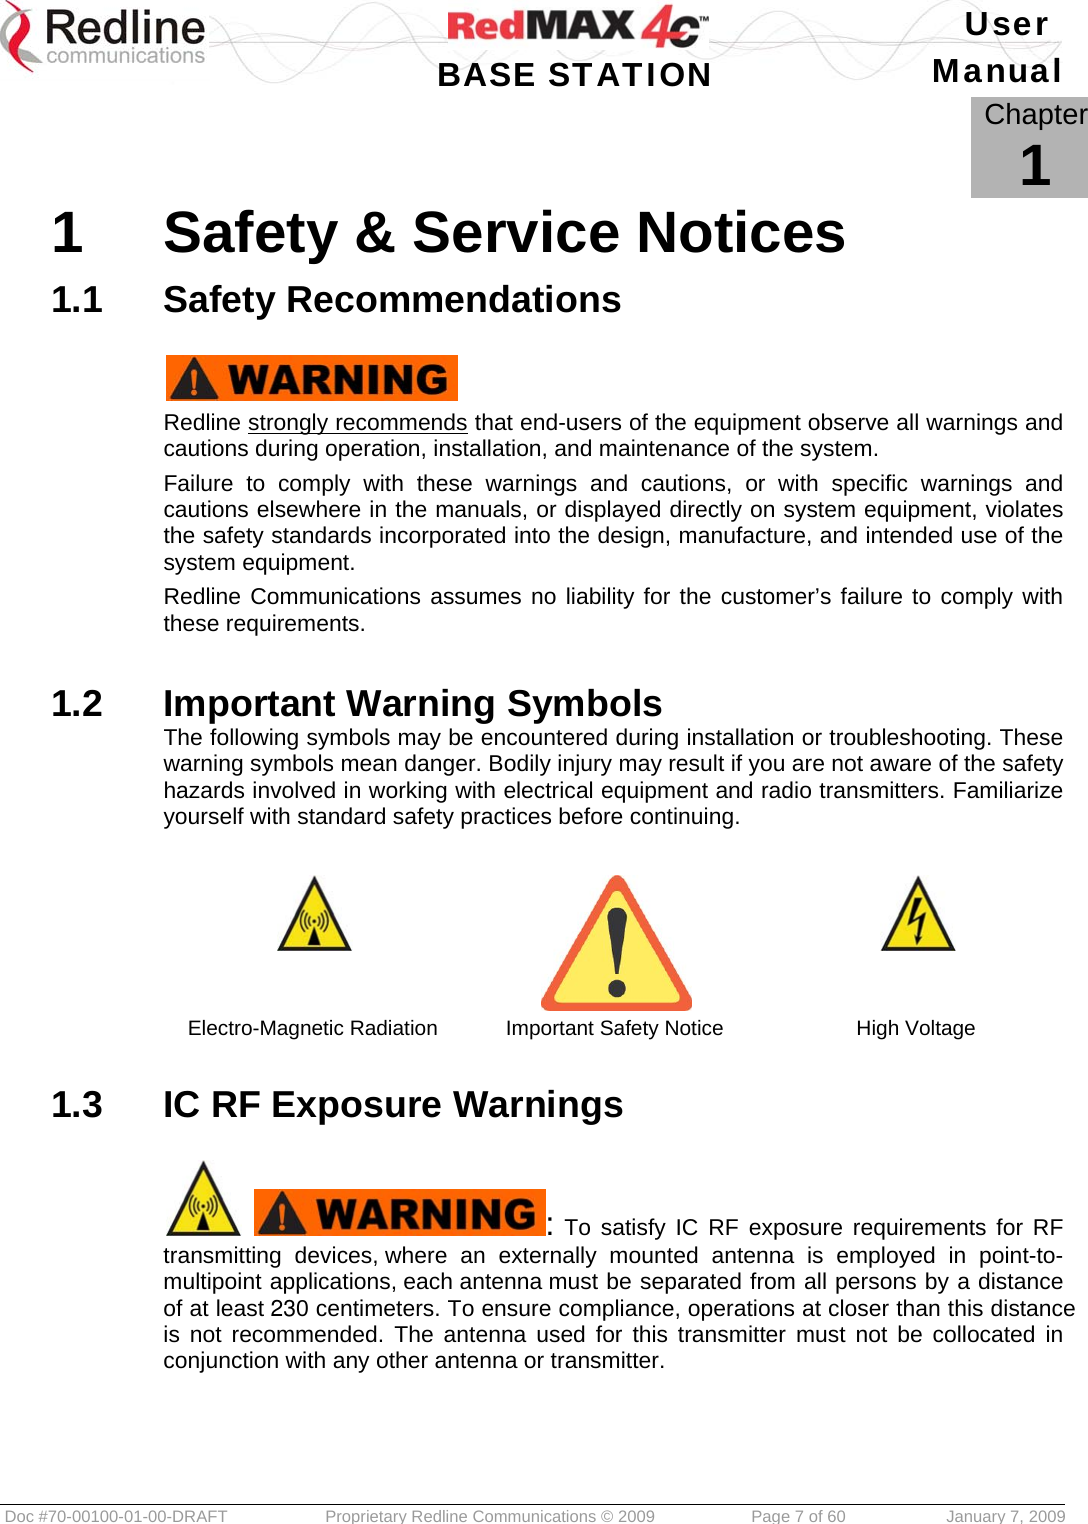   User  BASE STATION Manual  Doc #70-00100-01-00-DRAFT  Proprietary Redline Communications © 2009   Page 7 of 60  January 7, 2009            Chapter 1 1  Safety &amp; Service Notices 1.1  Safety Recommendations   Redline strongly recommends that end-users of the equipment observe all warnings and cautions during operation, installation, and maintenance of the system. Failure to comply with these warnings and cautions, or with specific warnings and cautions elsewhere in the manuals, or displayed directly on system equipment, violates the safety standards incorporated into the design, manufacture, and intended use of the system equipment. Redline Communications assumes no liability for the customer’s failure to comply with these requirements.  1.2  Important Warning Symbols The following symbols may be encountered during installation or troubleshooting. These warning symbols mean danger. Bodily injury may result if you are not aware of the safety hazards involved in working with electrical equipment and radio transmitters. Familiarize yourself with standard safety practices before continuing.    Electro-Magnetic Radiation  Important Safety Notice  High Voltage  1.3  IC RF Exposure Warnings   : To satisfy IC RF exposure requirements for RF transmitting devices, where an externally mounted antenna is employed in point-to-multipoint applications, each antenna must be separated from all persons by a distance of at least 230 centimeters. To ensure compliance, operations at closer than this distance is not recommended. The antenna used for this transmitter must not be collocated in conjunction with any other antenna or transmitter.    